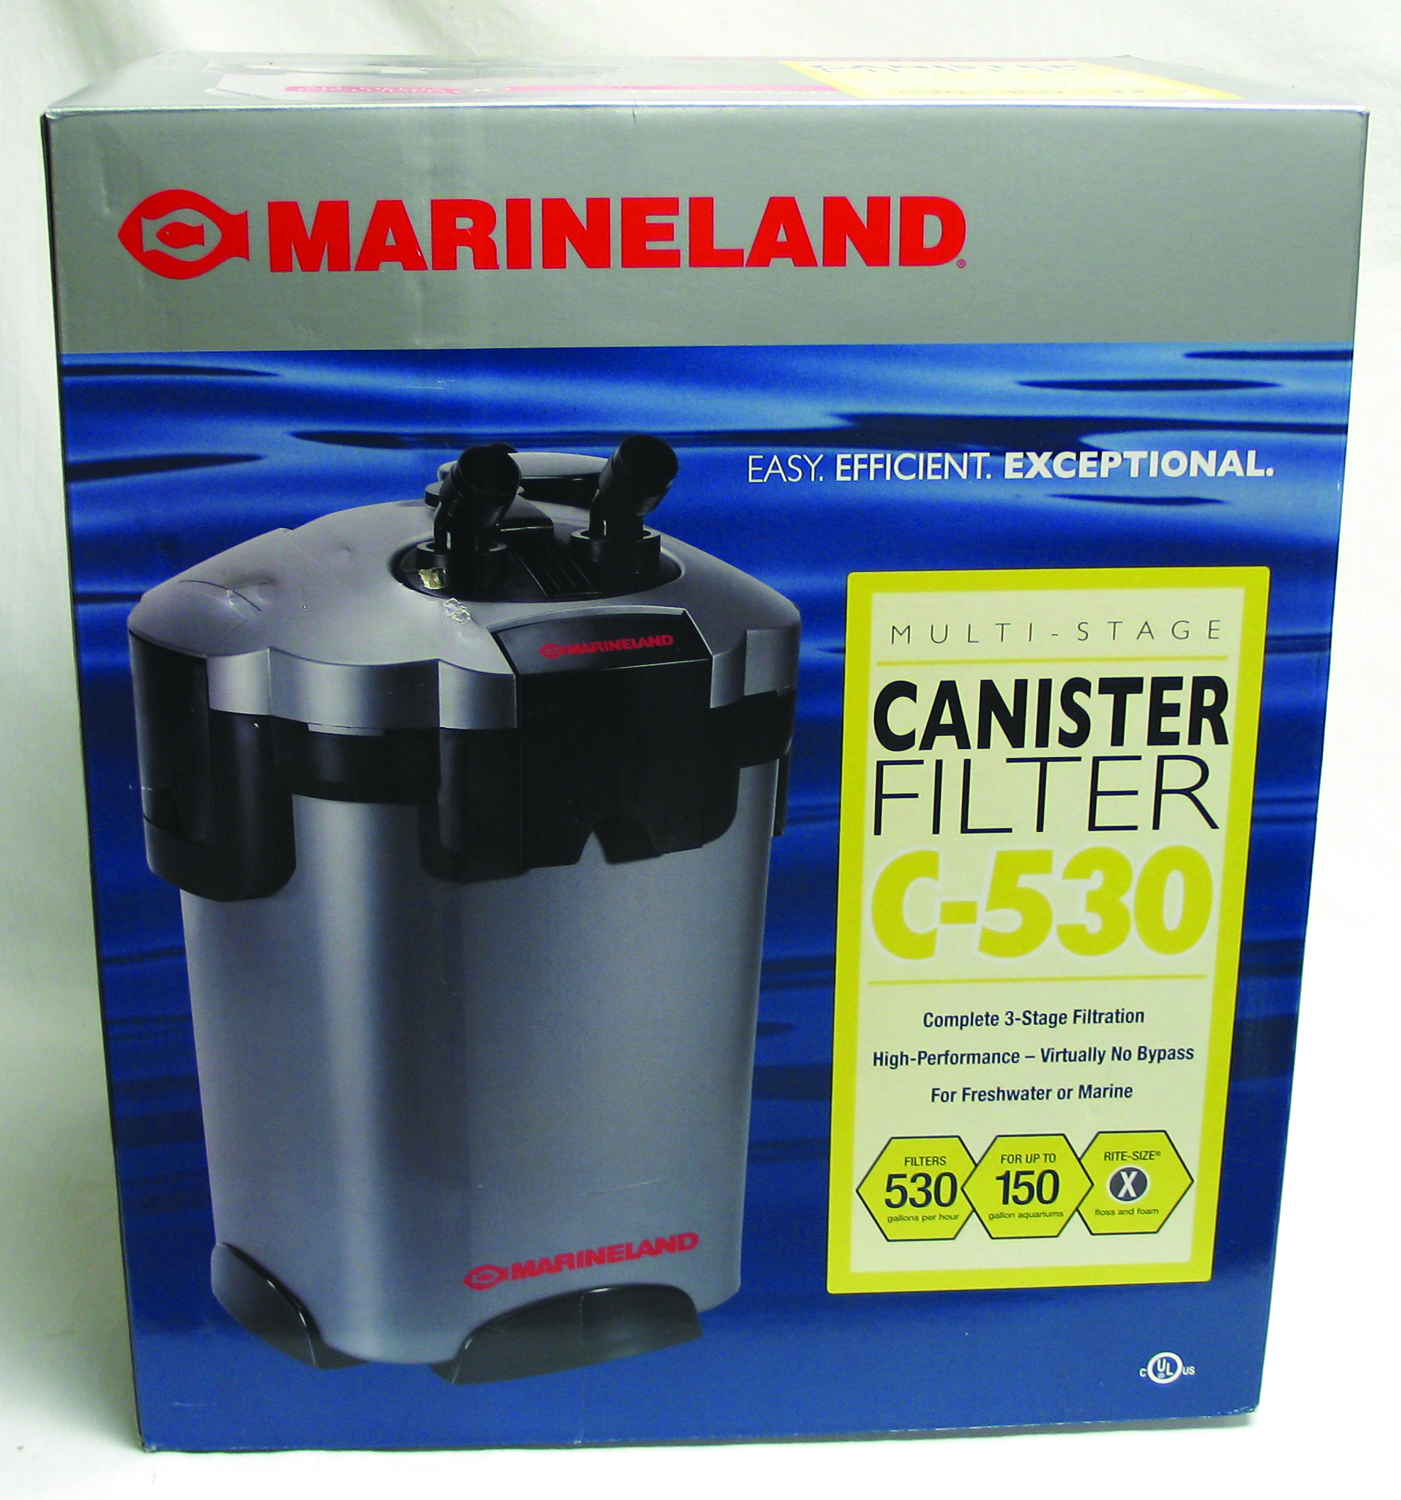 C-SERIES CANISTER FILTER C-530